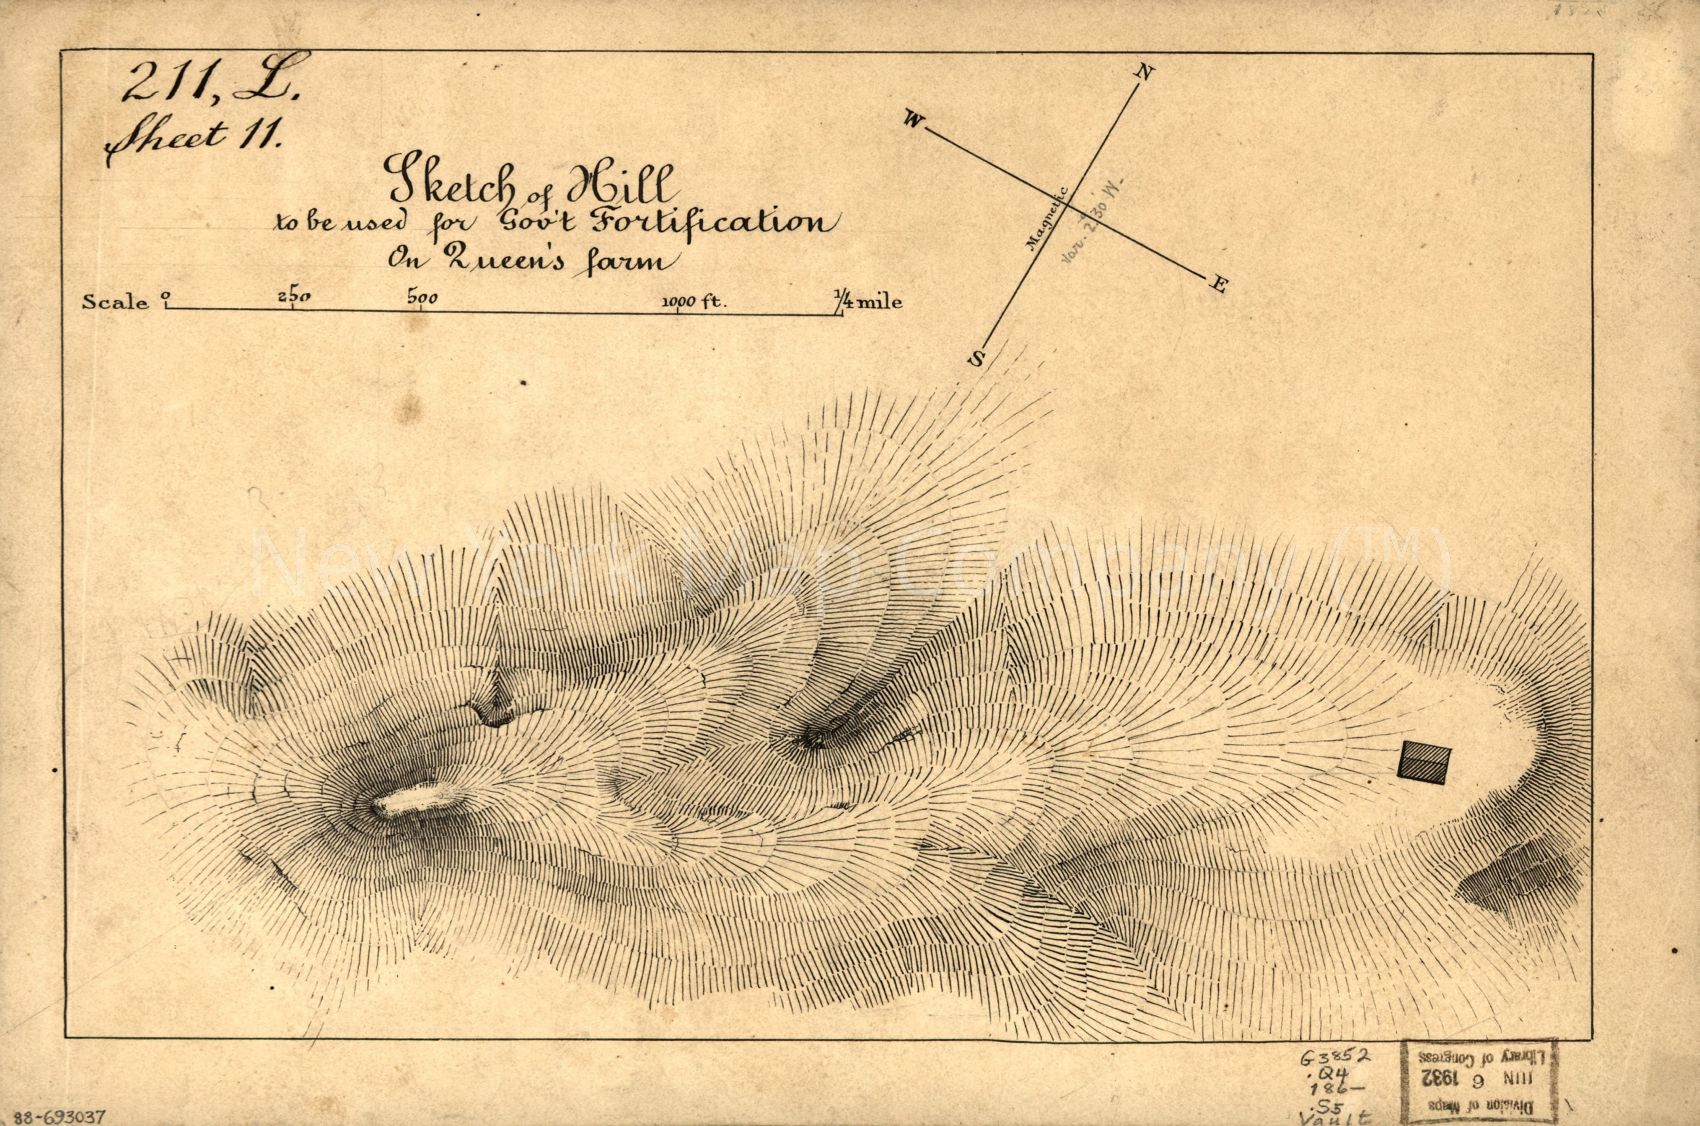 1860 map Sketch of hill to be used for gov't fortification on Queen's Farm: Washington D.C.. Map Subjects: District of Columbia | Fortification | Manuscript Maps | Topographic | Queen's Farm Washington | Queen's Farm Washington | DC | Washington | Washin